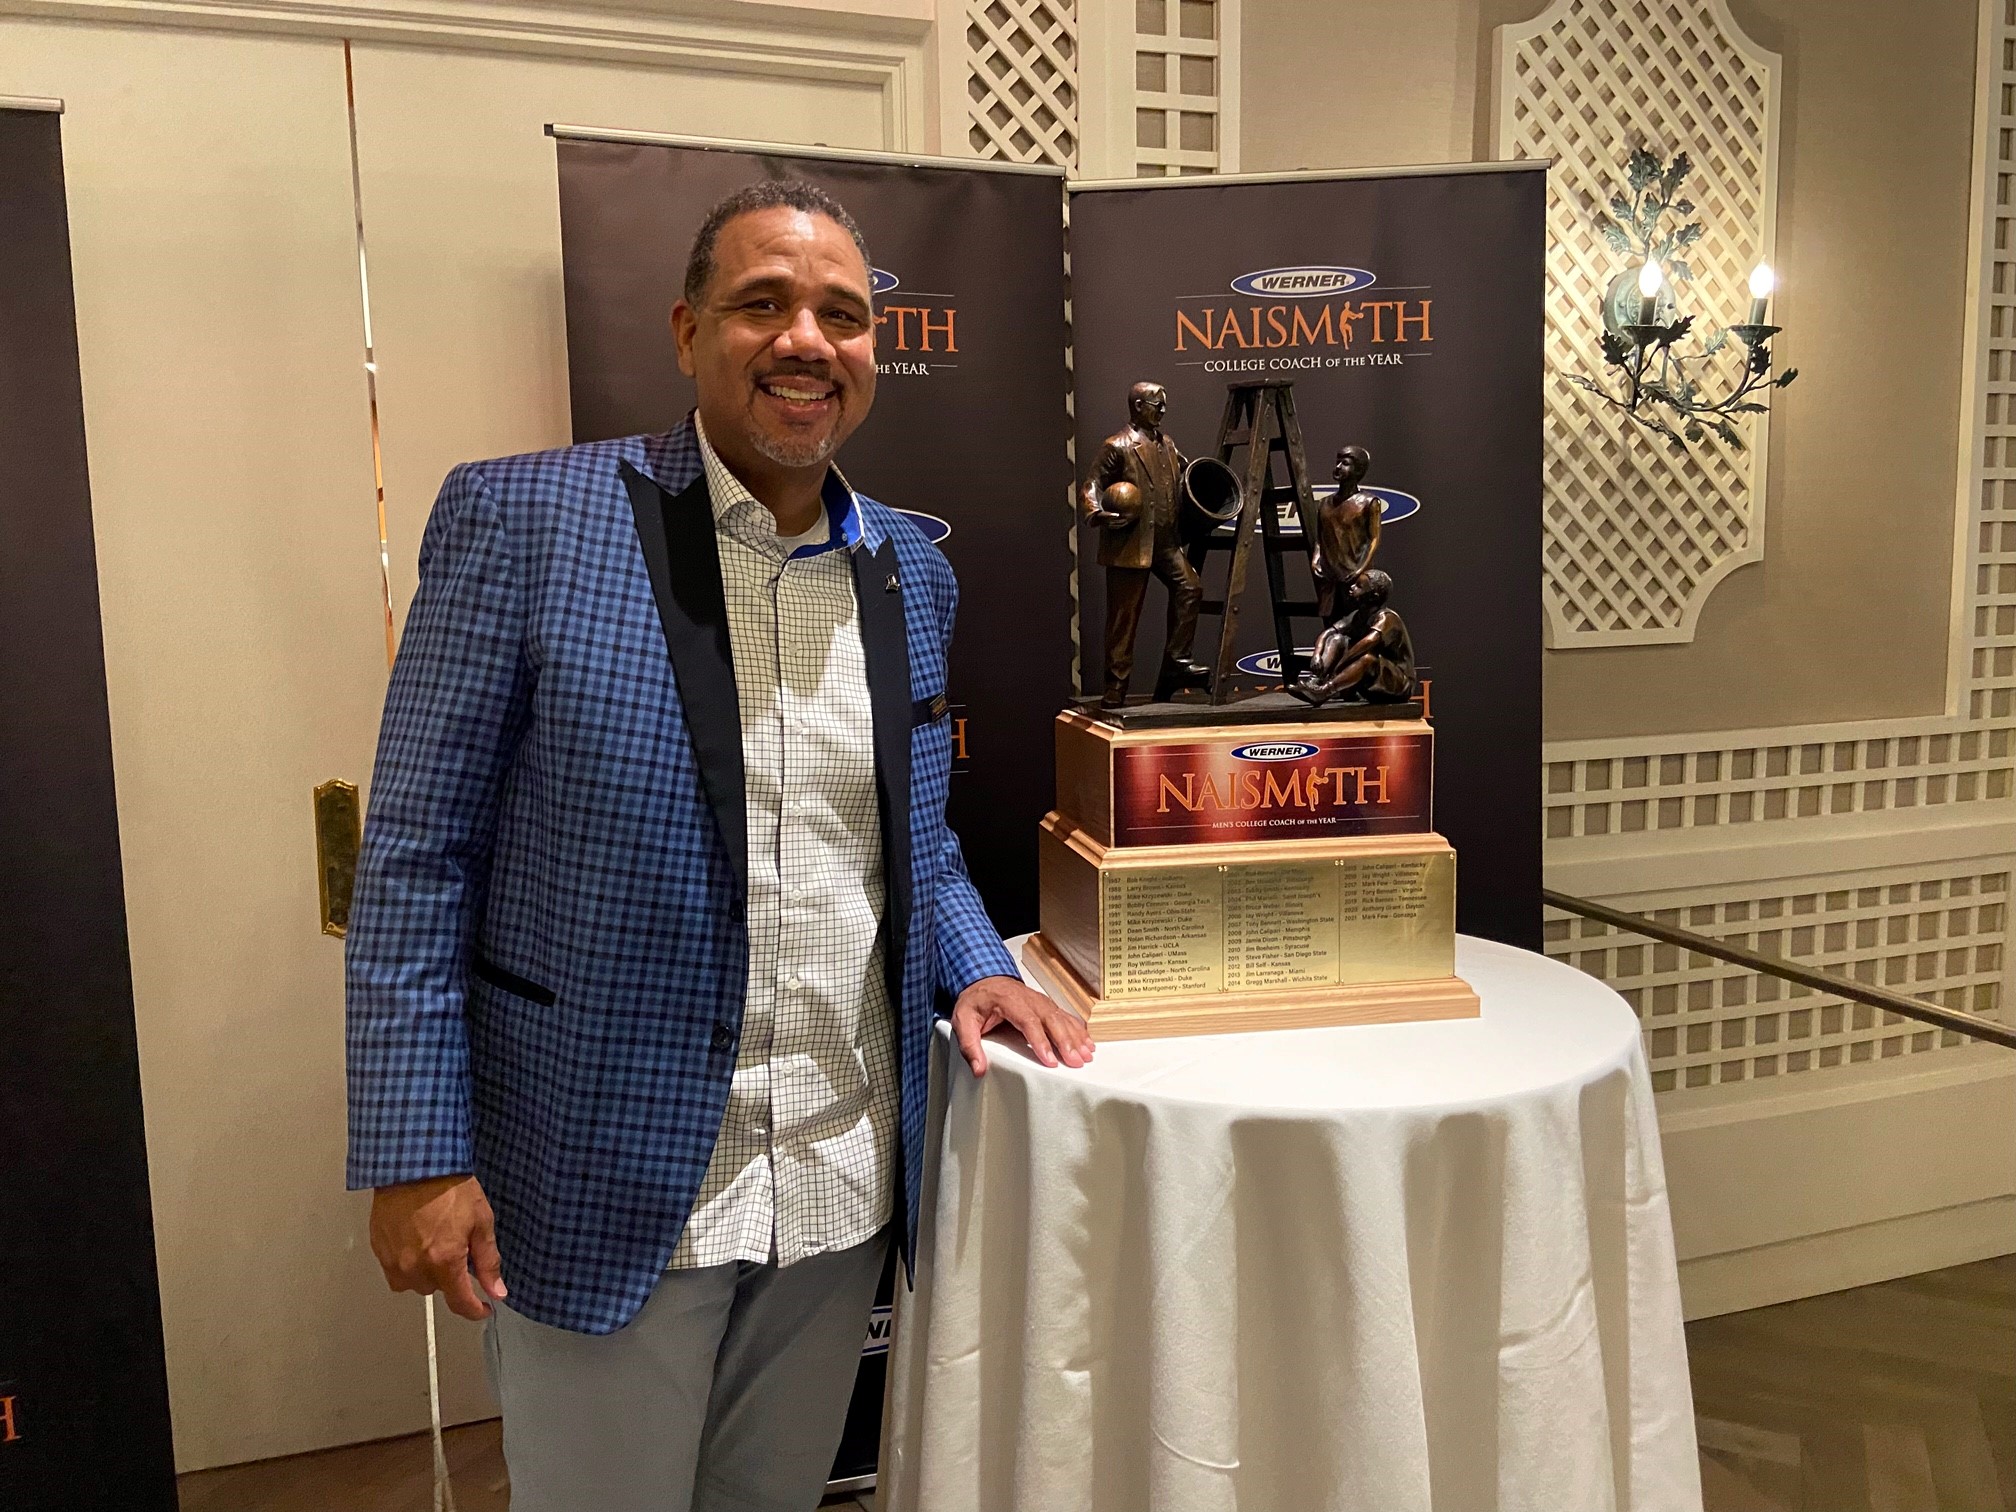 PC men's basketball coach Cooley named 2022 Naismith Coach Of The Year